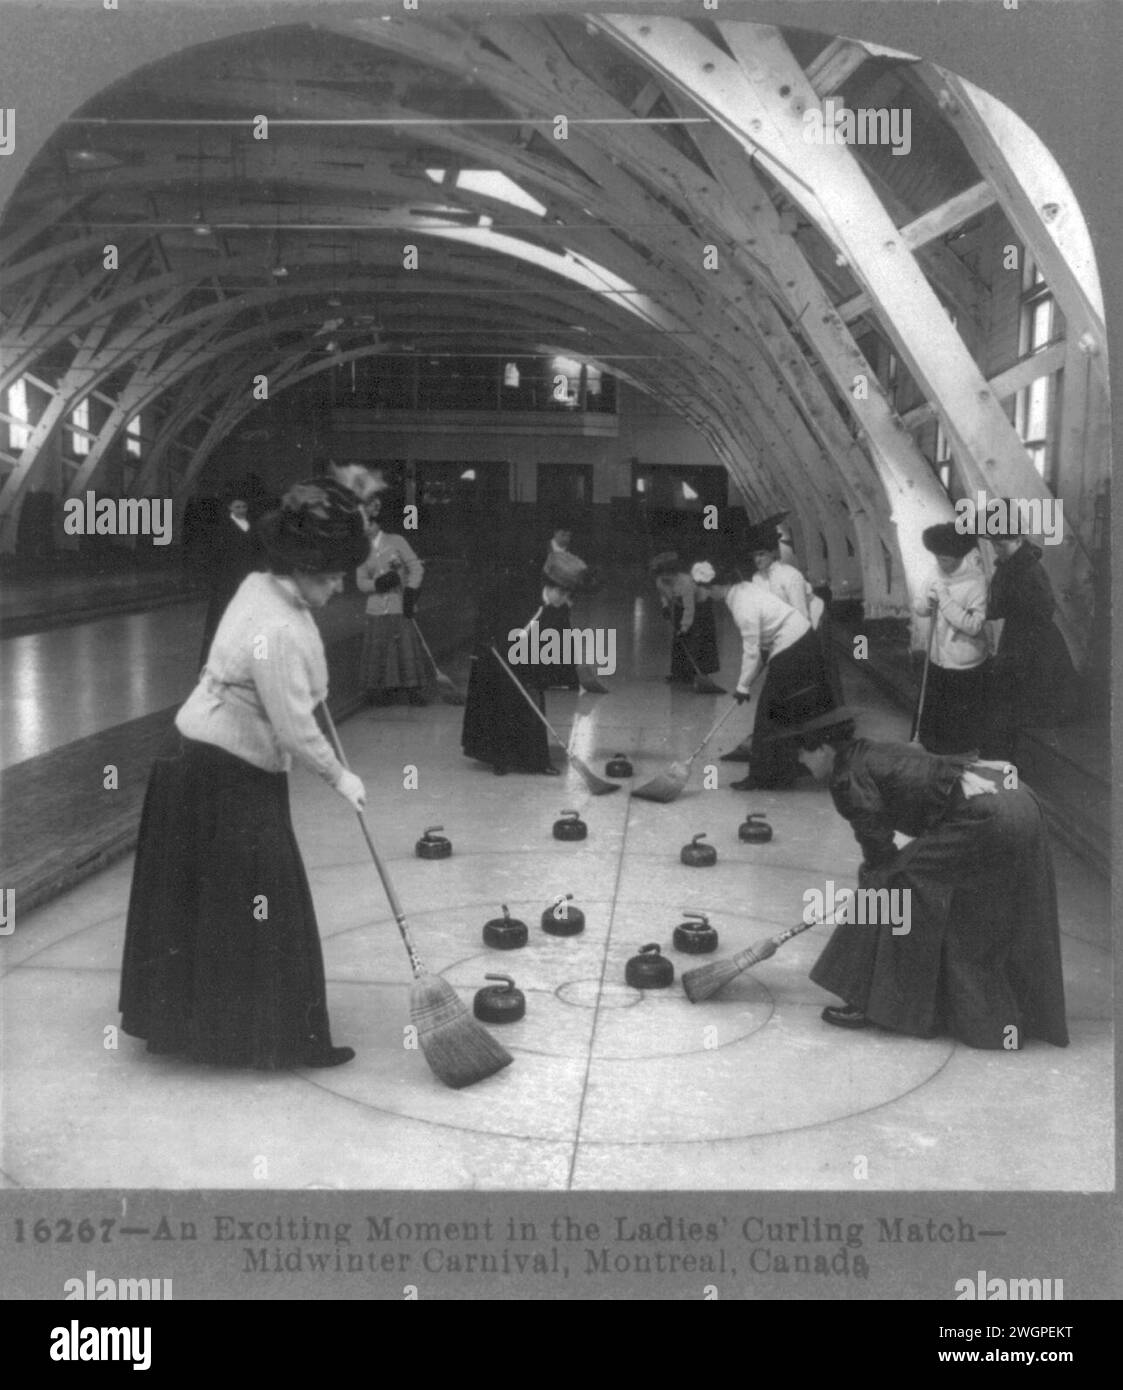 Vintage Photography showing activity of the annual  Midwinter carnival in Montreal.  Here in the ladies' curling match. Depicts ladies all dressed up with hats playing curling on an inside facility.  Circa 1900 Stock Photo